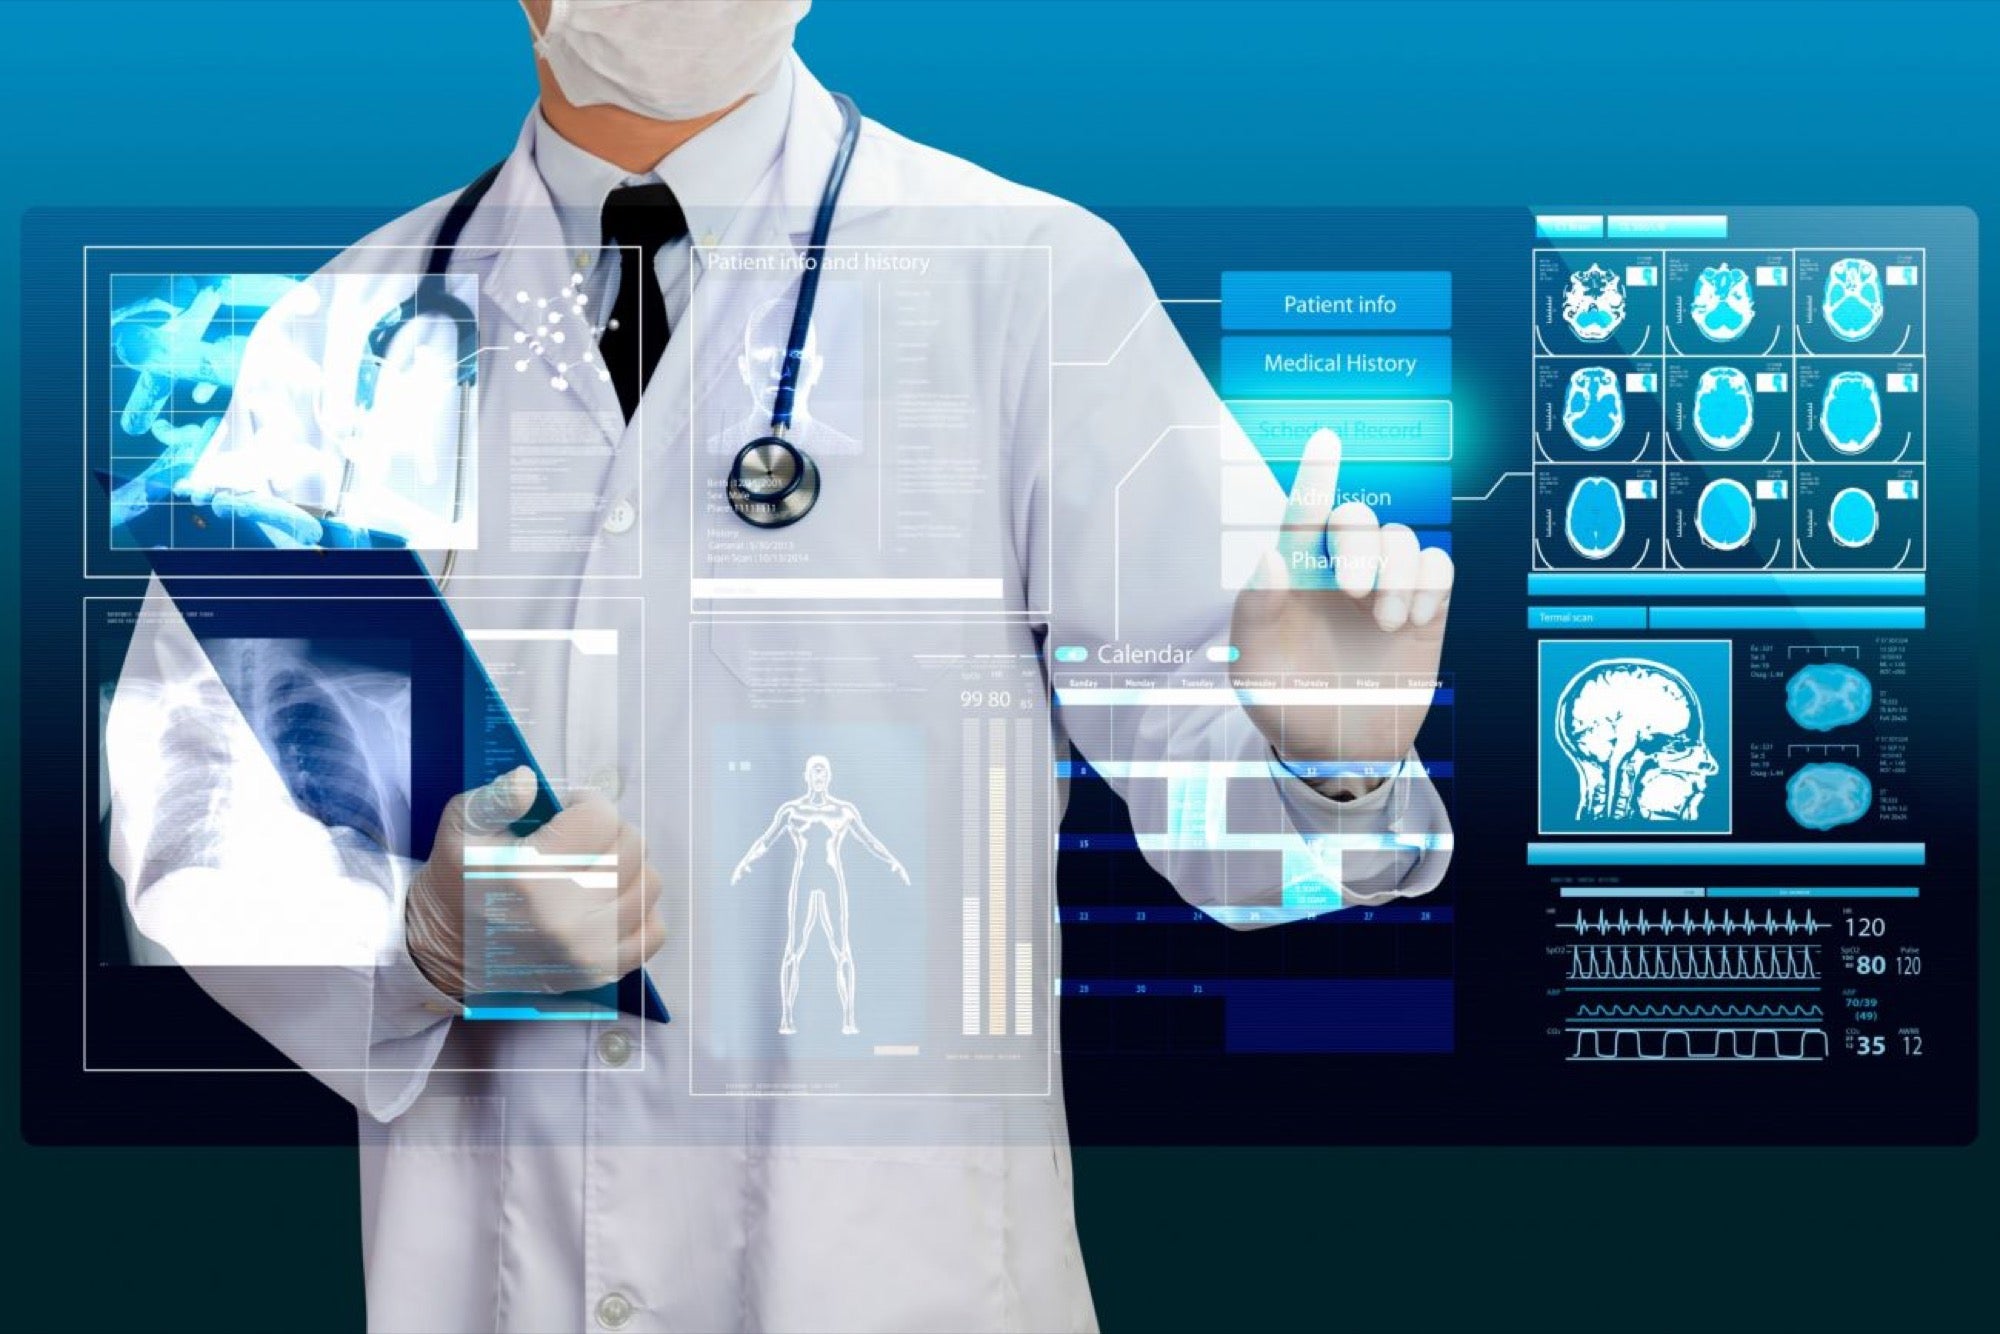 Technological advancement and uptake of IT in medical sector to boost the digital healthcare industry